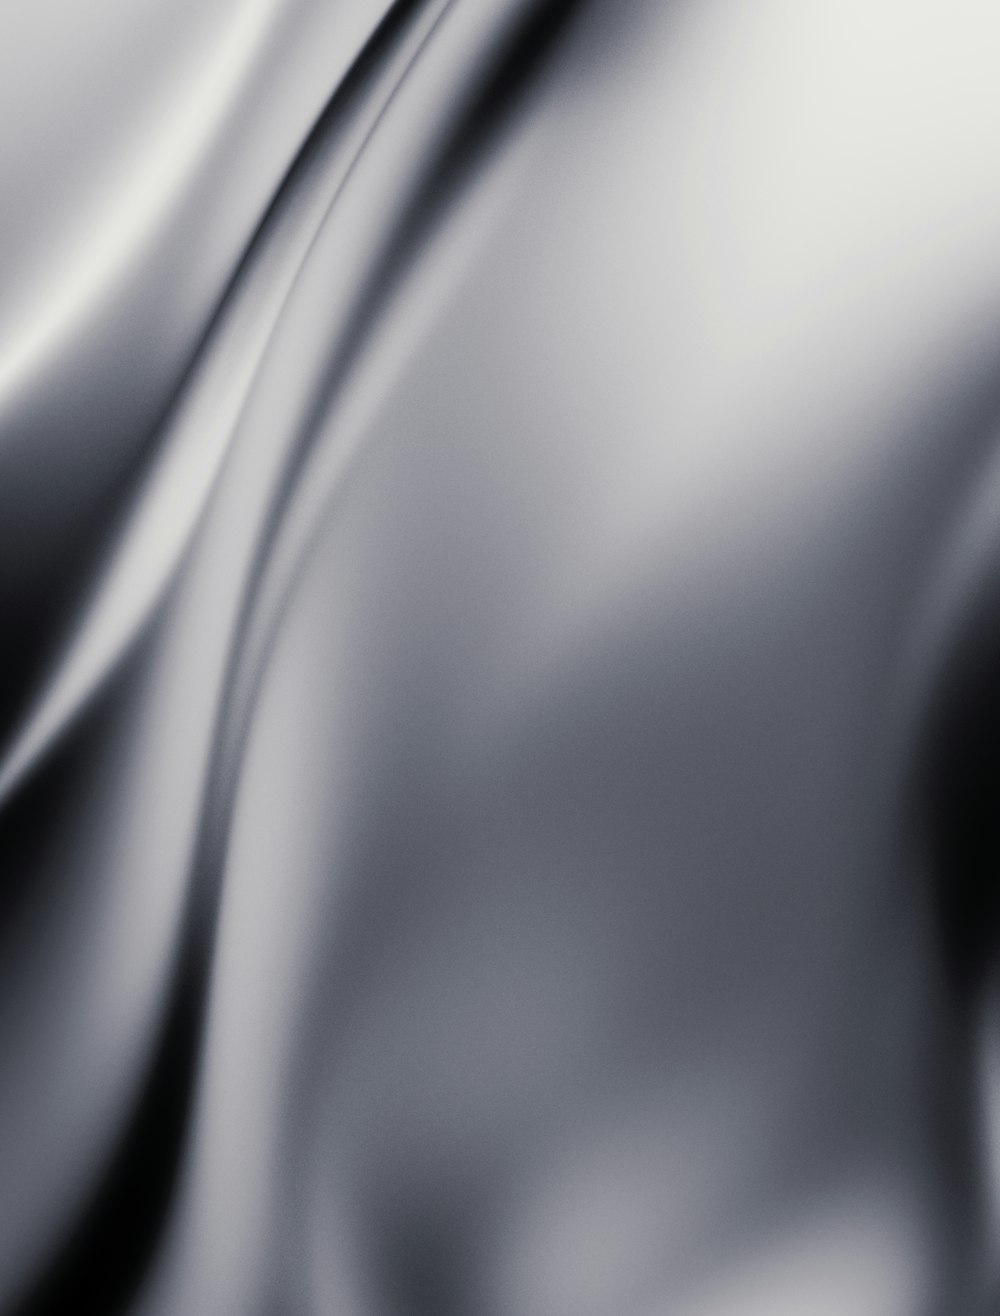 Silver Background Pictures | Download Free Images on Unsplash